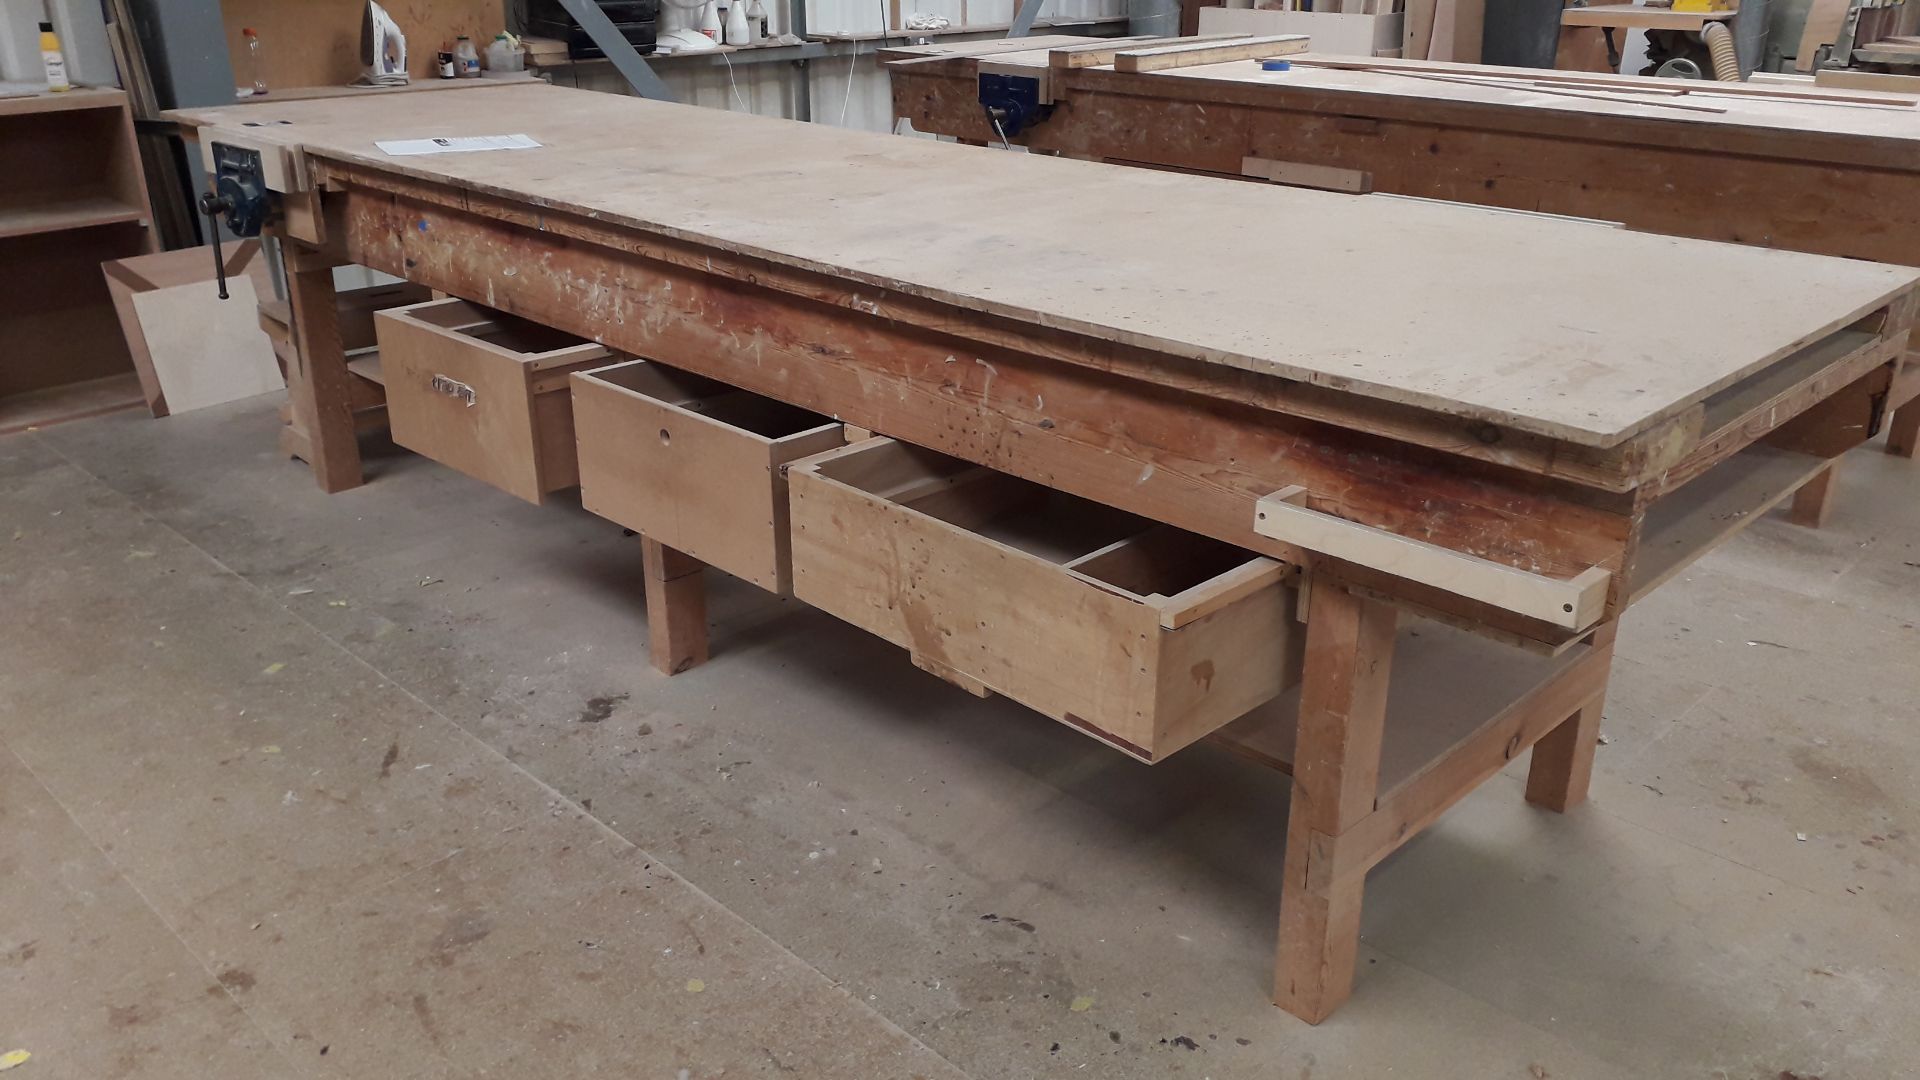 3x Timber Workbenches with Vice and Storage Under, Approx 4m x 1m - Located on 1st Floor. Contents - Image 5 of 7